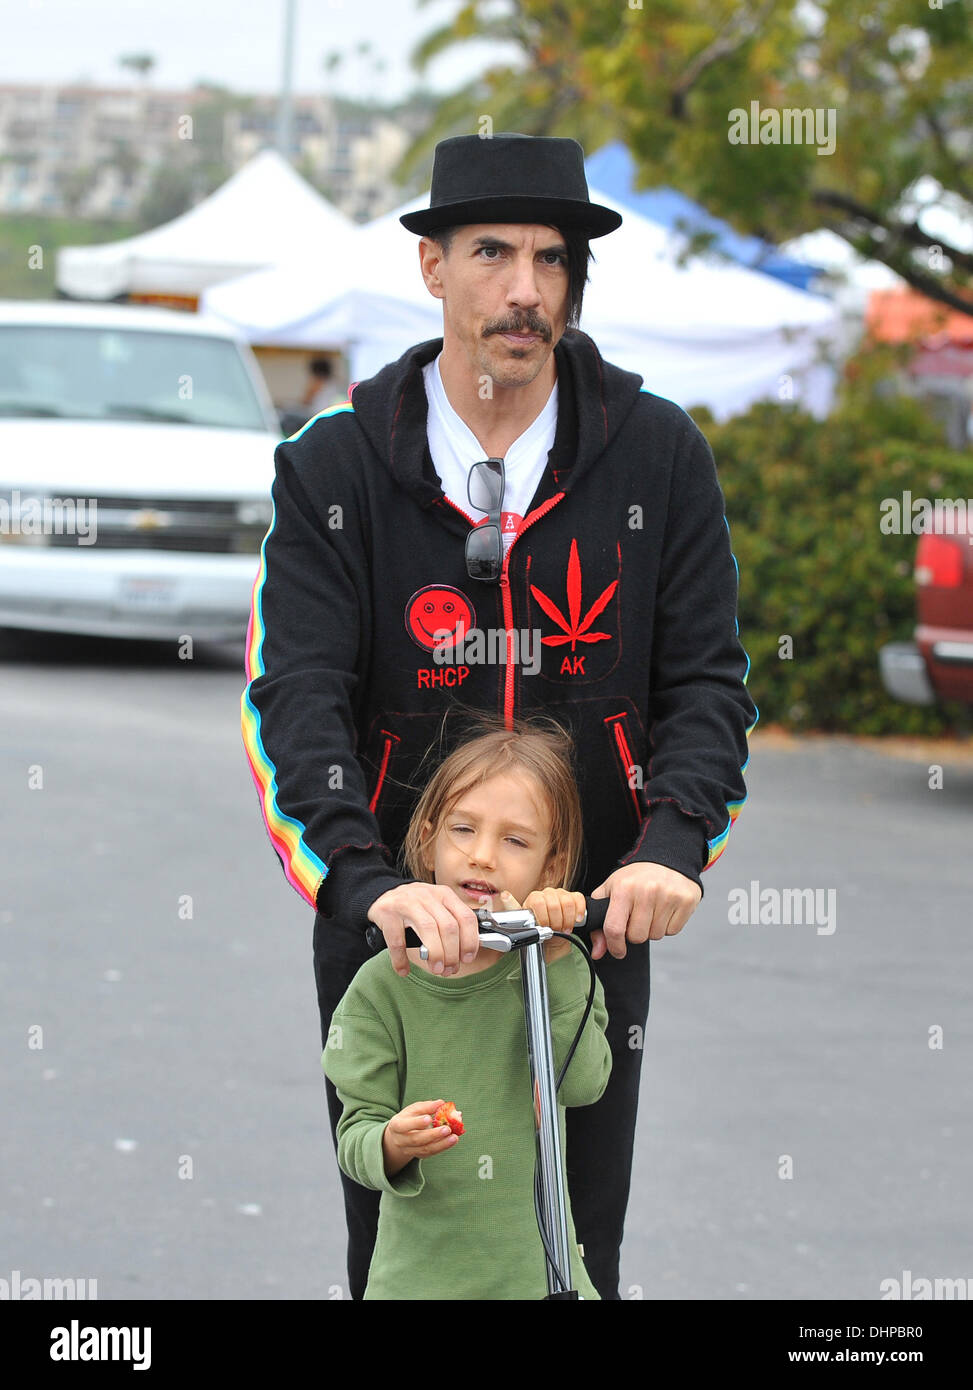 Anthony Kiedis of The Red Hot Chilli Peppers takes a ride on a scooter with his son, Everly Bear Kiedis at Malibu Farmer's Market  Malibu, California - 13.05.12 Stock Photo